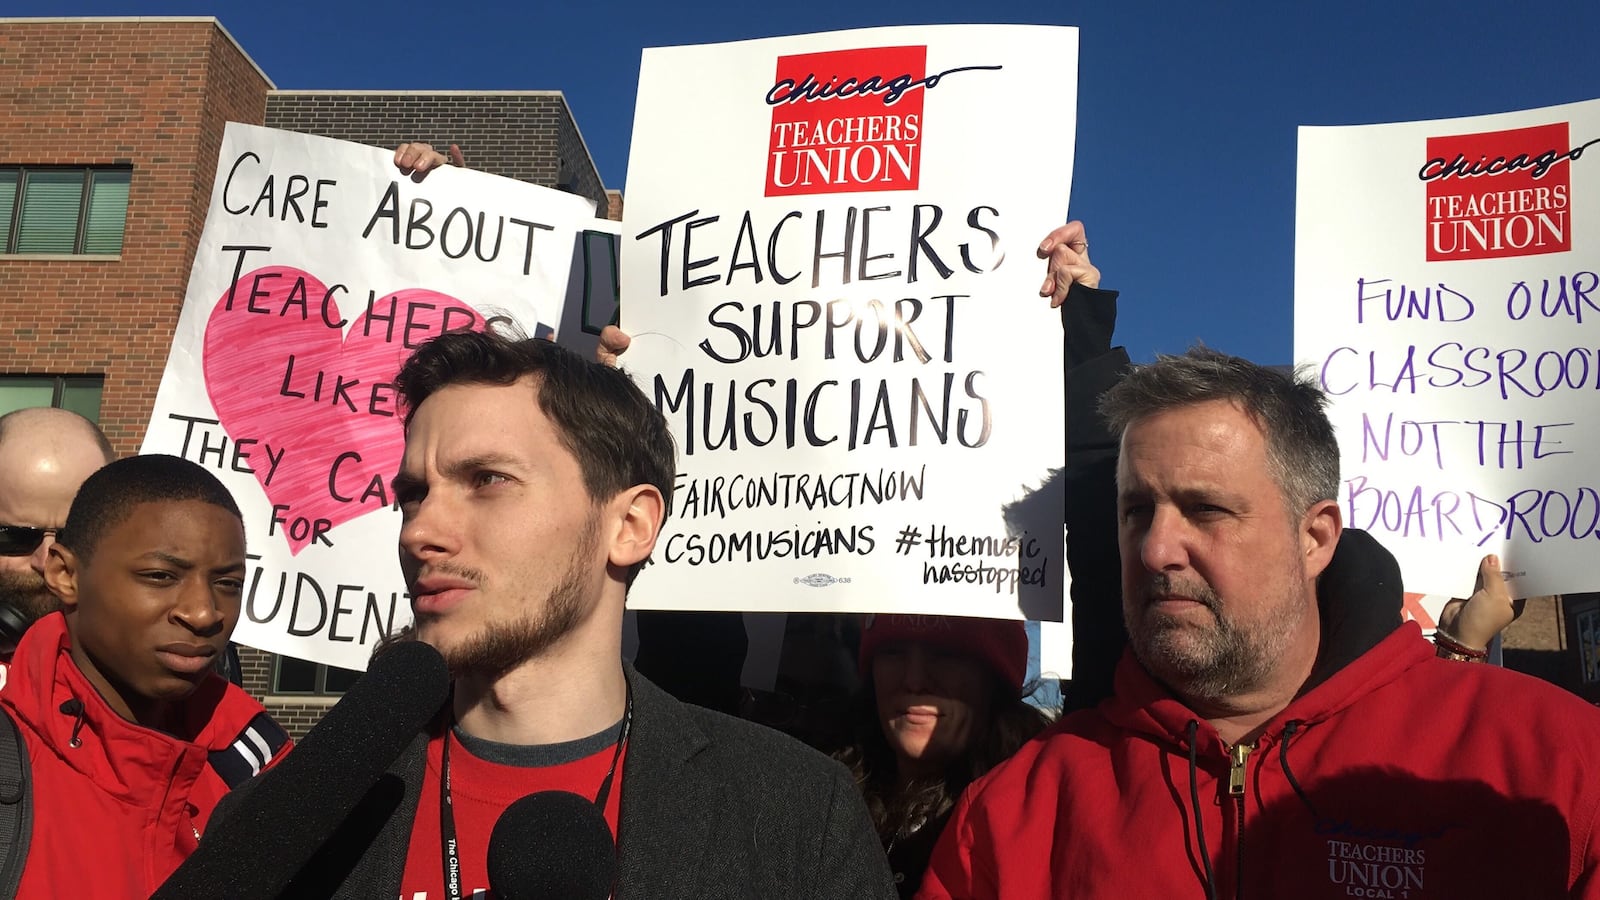 Teacher Andrew Van Herik, center, with microphone, and Chicago Teachers Union charter division President Chris Baehrend speak at a press conference outside the Chicago High School of the Arts.